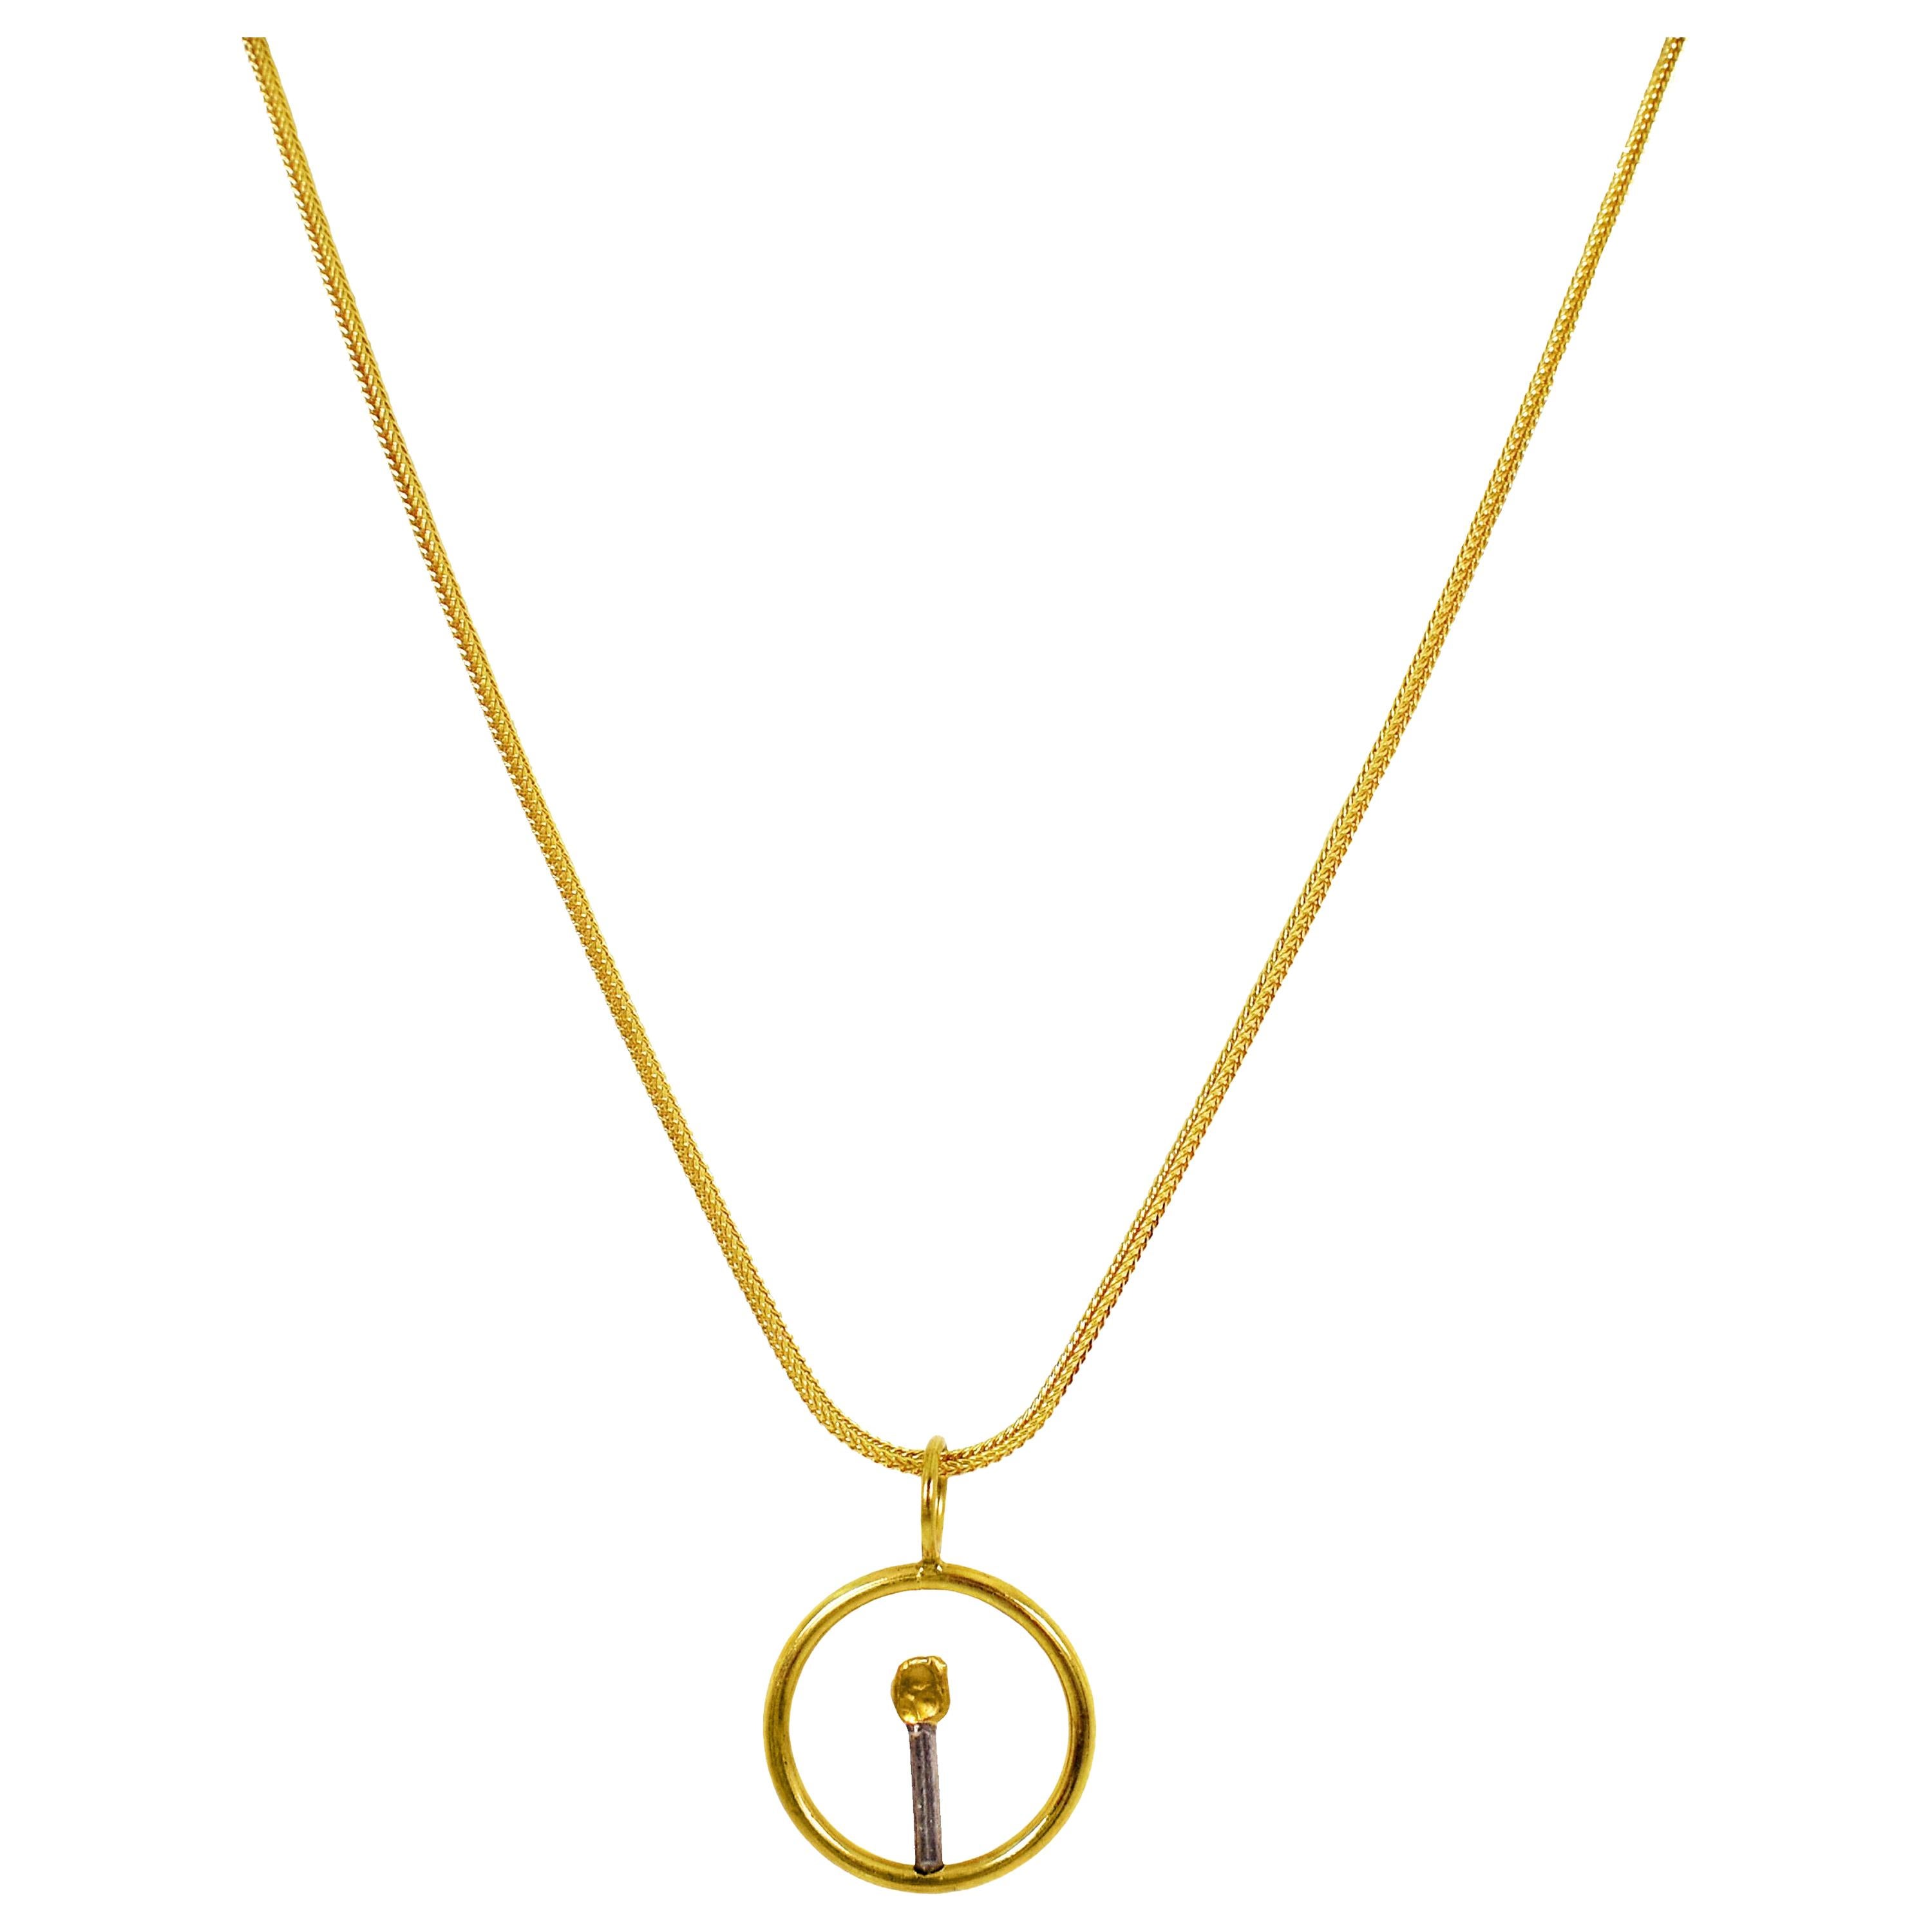 Let Your Light Shine, Stories in a Circle 22k Gold Two-Tone Pendant Necklace